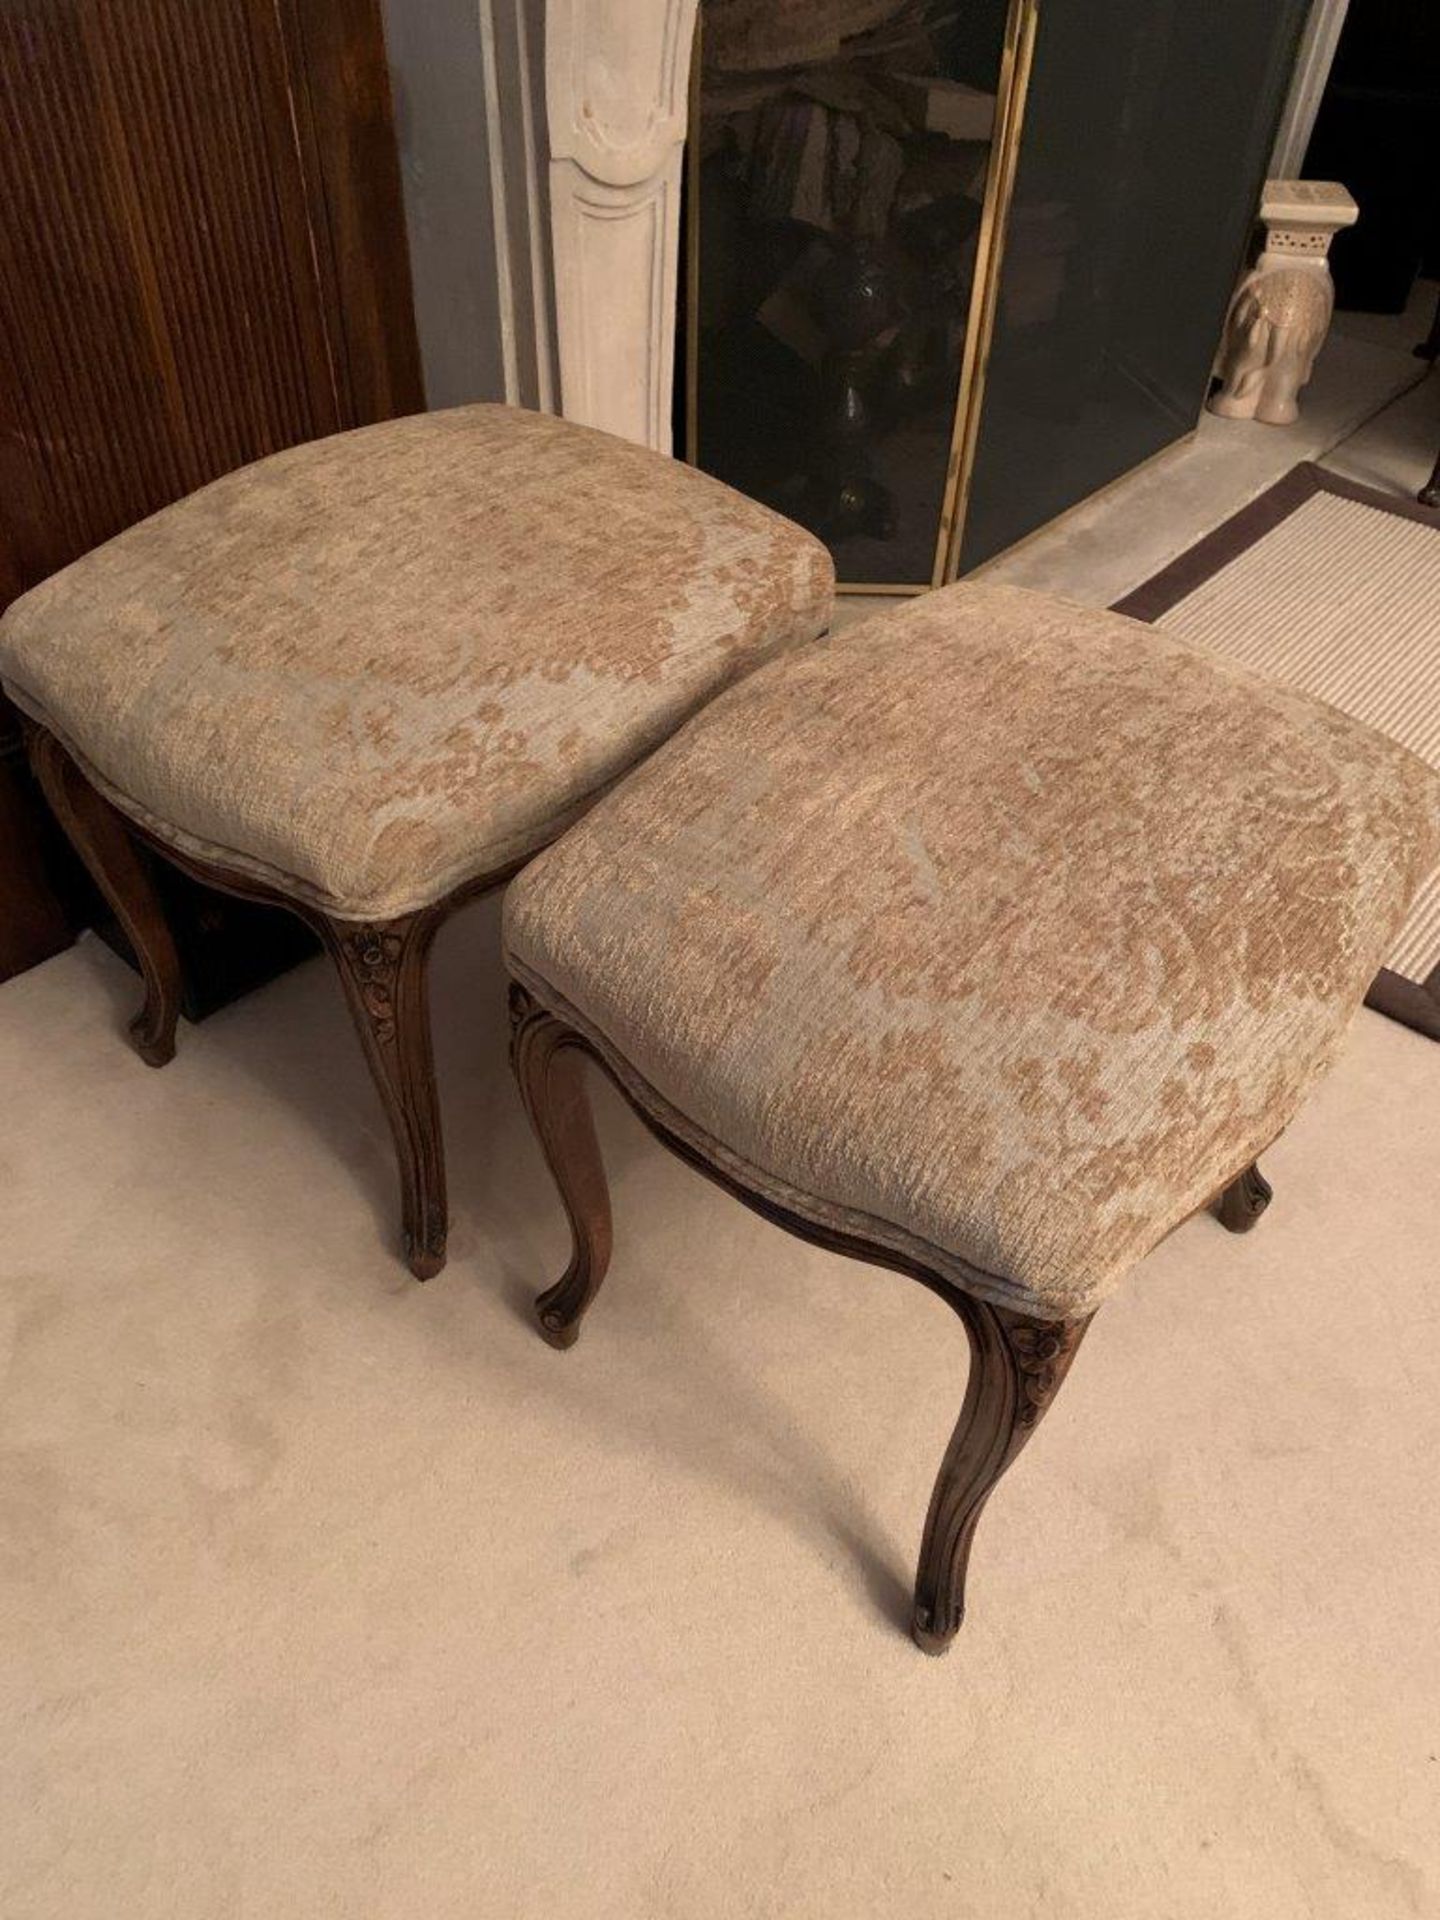 Pair of French style carved stools with upholstered seats